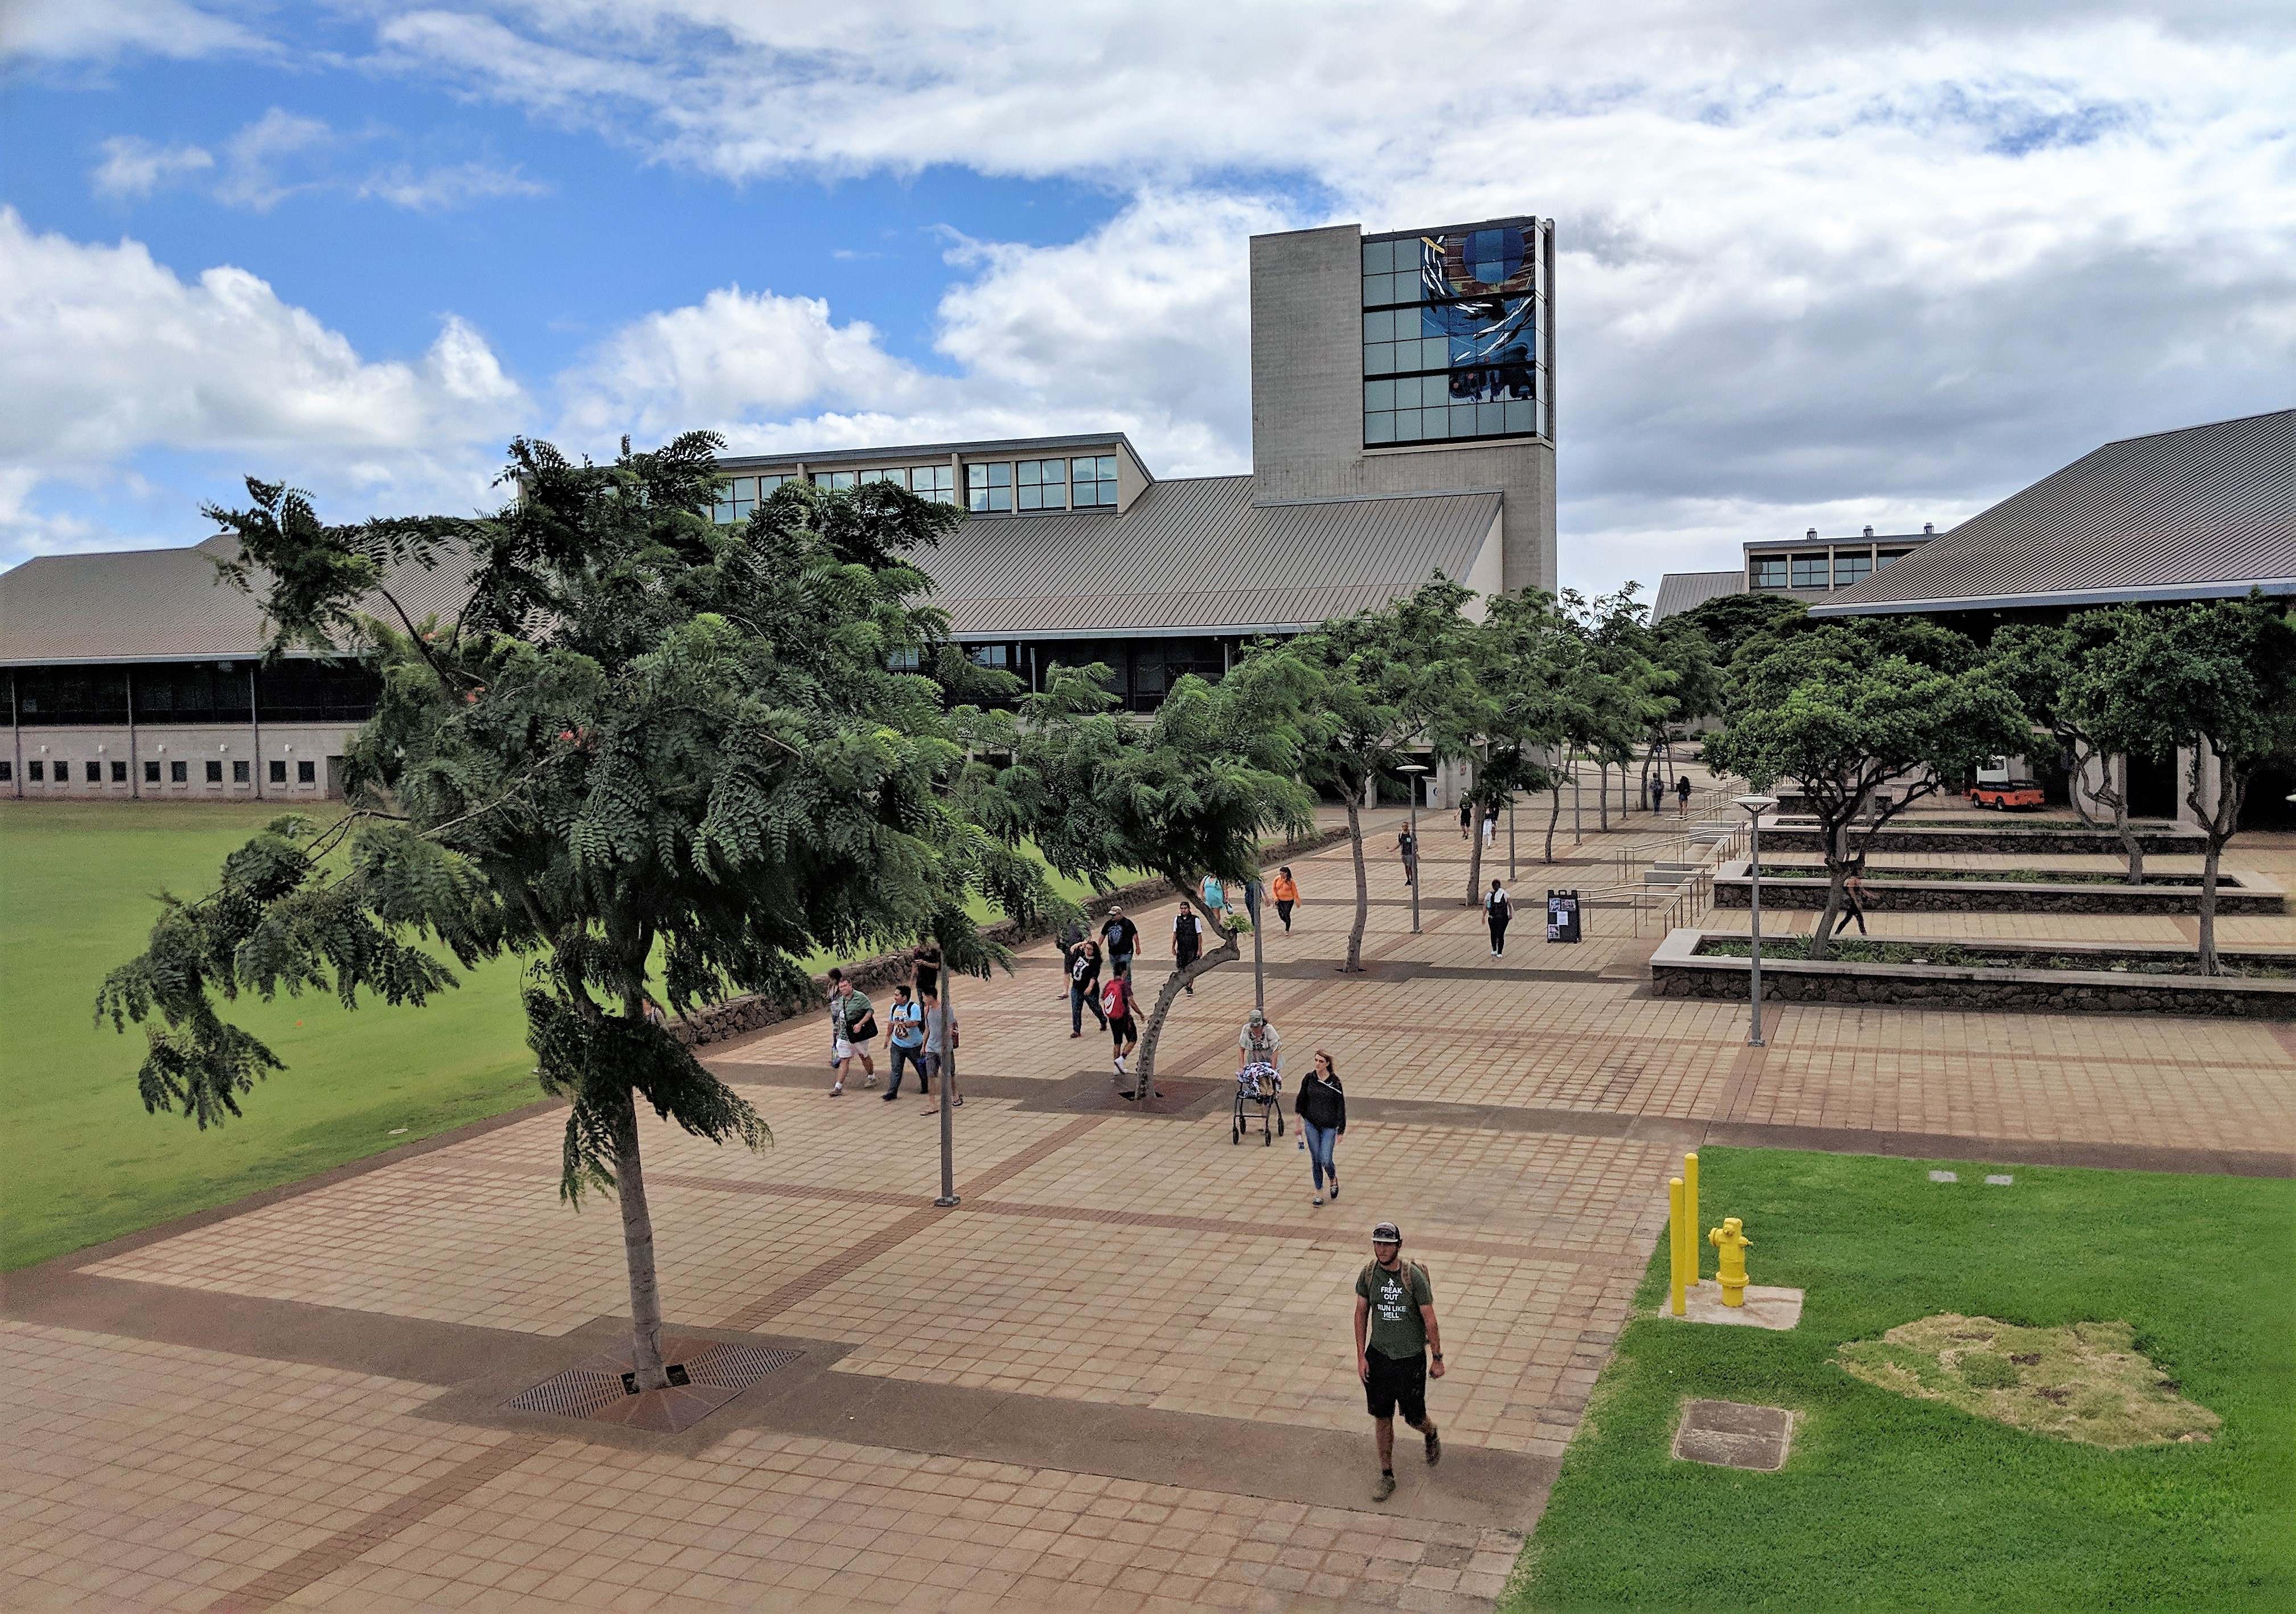 photo of the UH West Oahu campus looking from the Campus Center down at the broad walkway fronting the Campus Center Plaza. Students are walking and trees line the concrete walkway. In the background is the library building